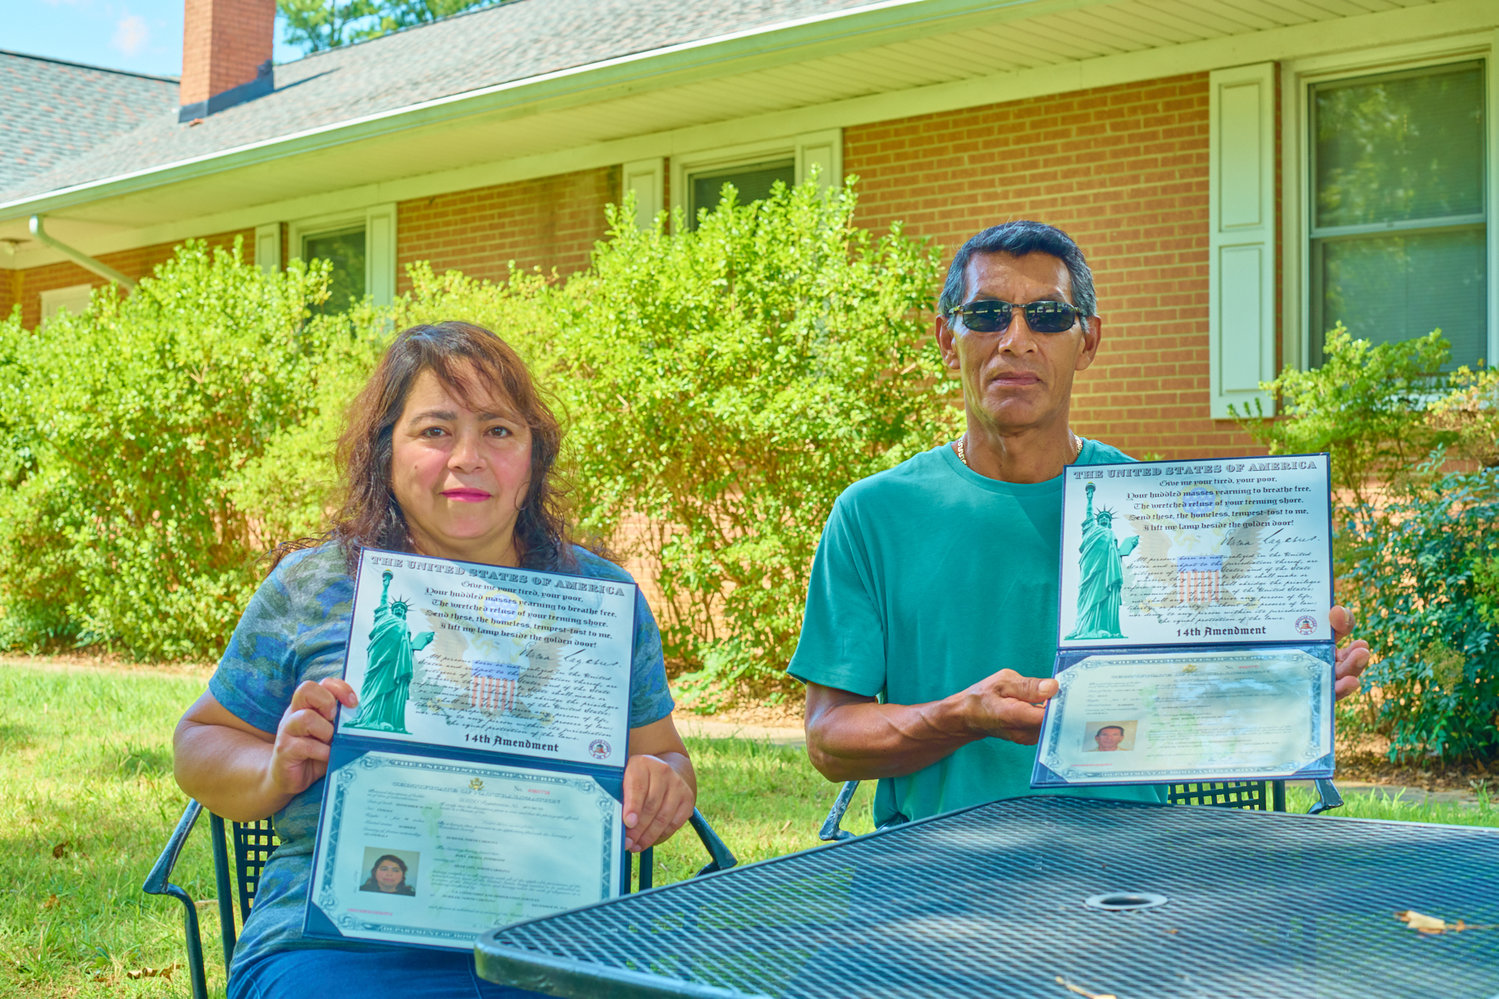 Dora Interiano and her husband José hold up their U.S. citizenship certificates, which both received last December with the help of Chatham Literacy.